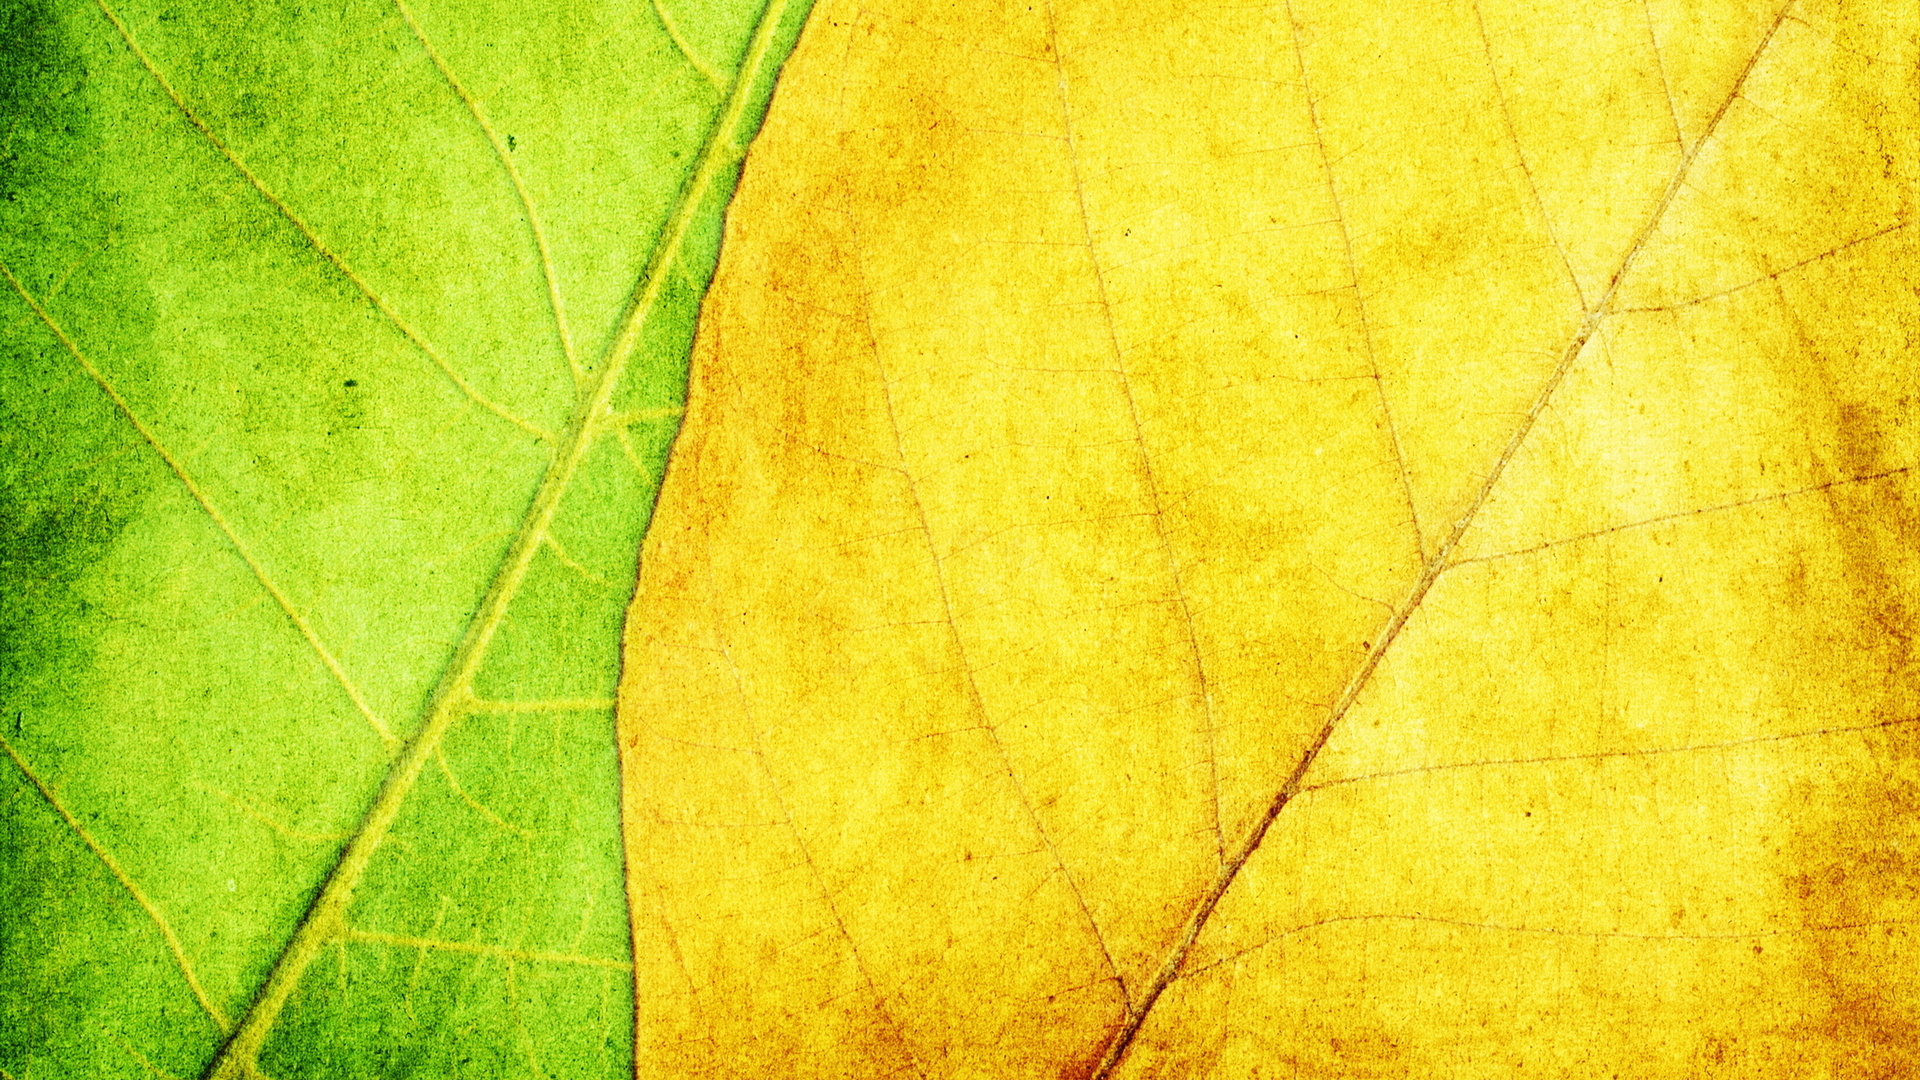 green and yellow leaf texture background image